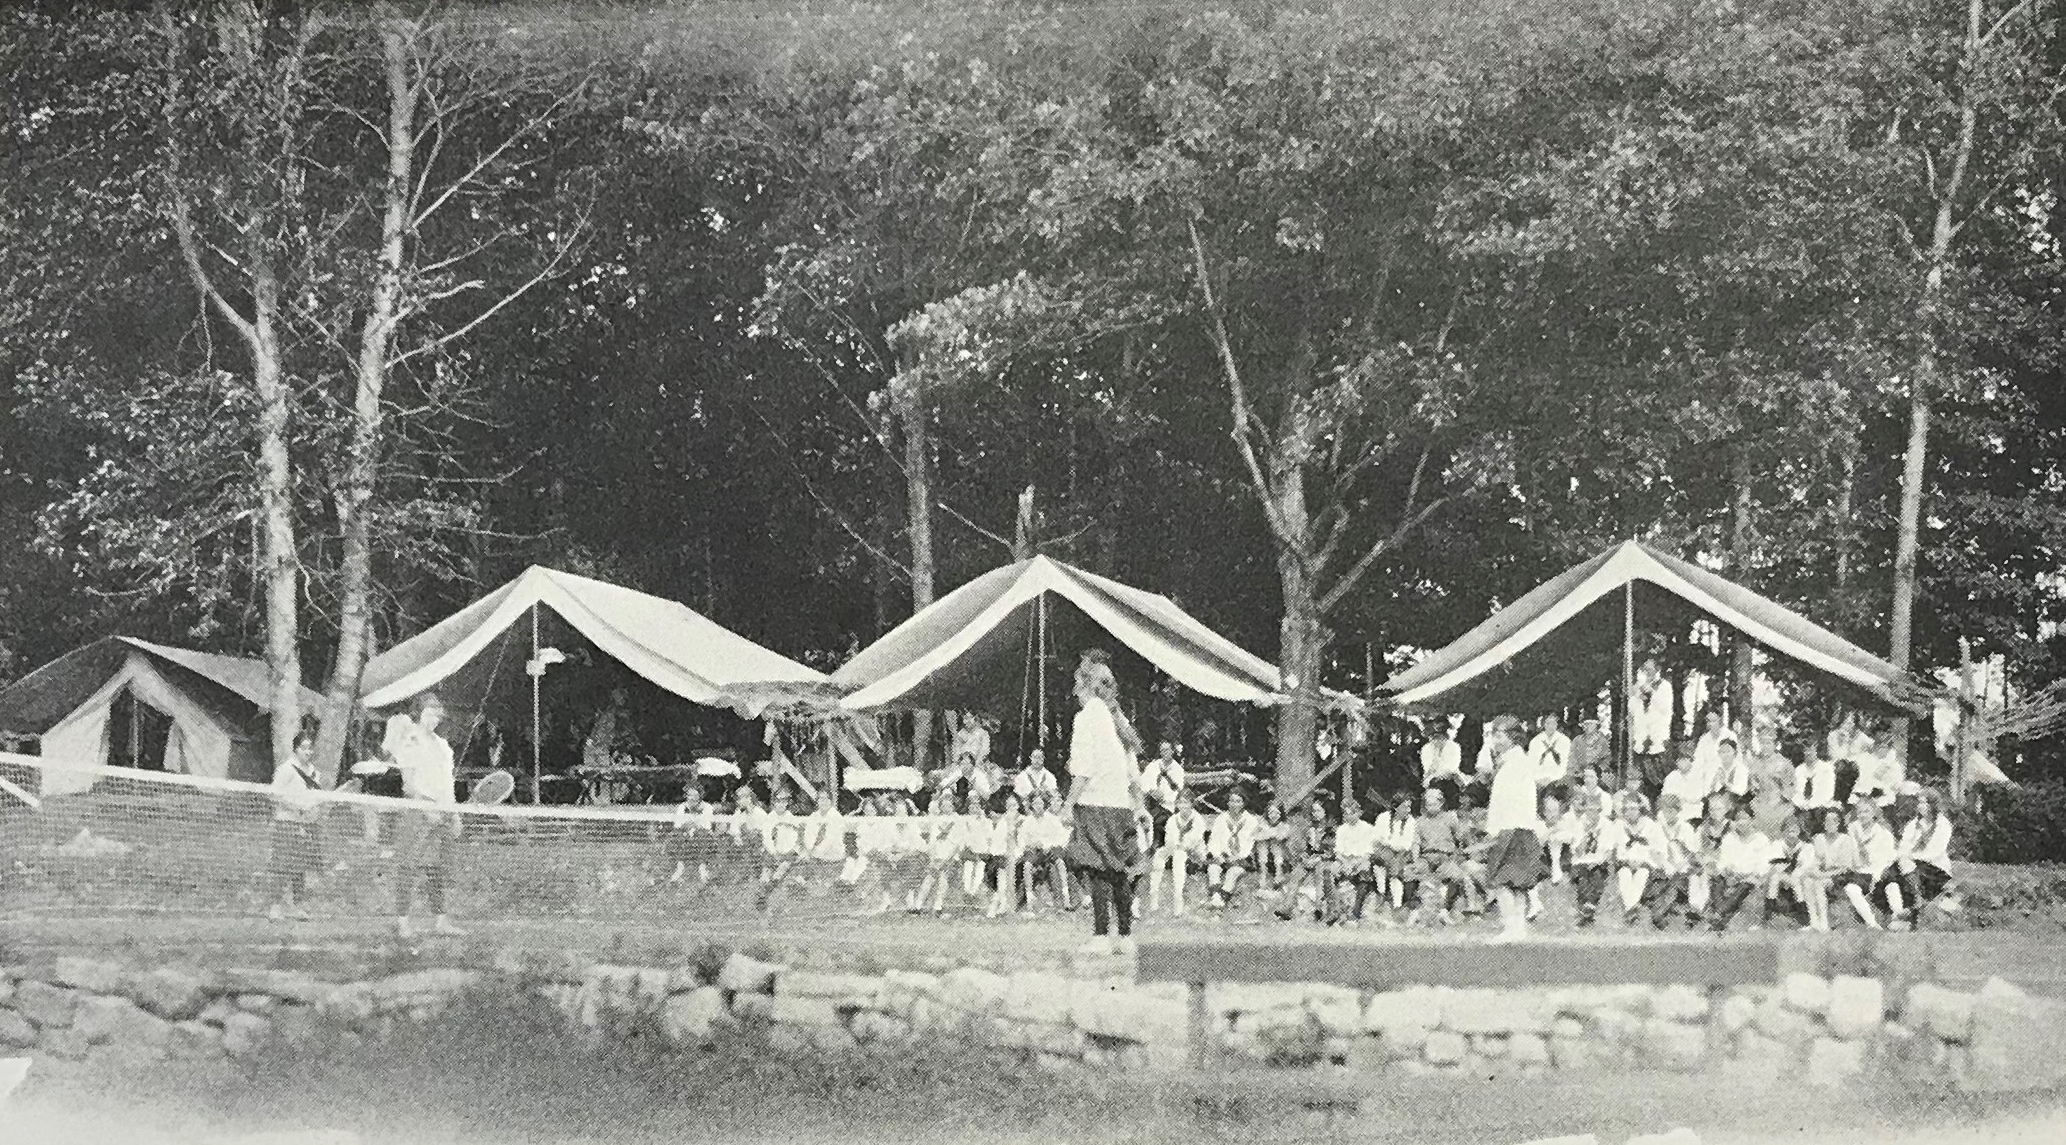 Camp Meenahga's 1928 brochure included an image of a row of canvas tents where the girls slept